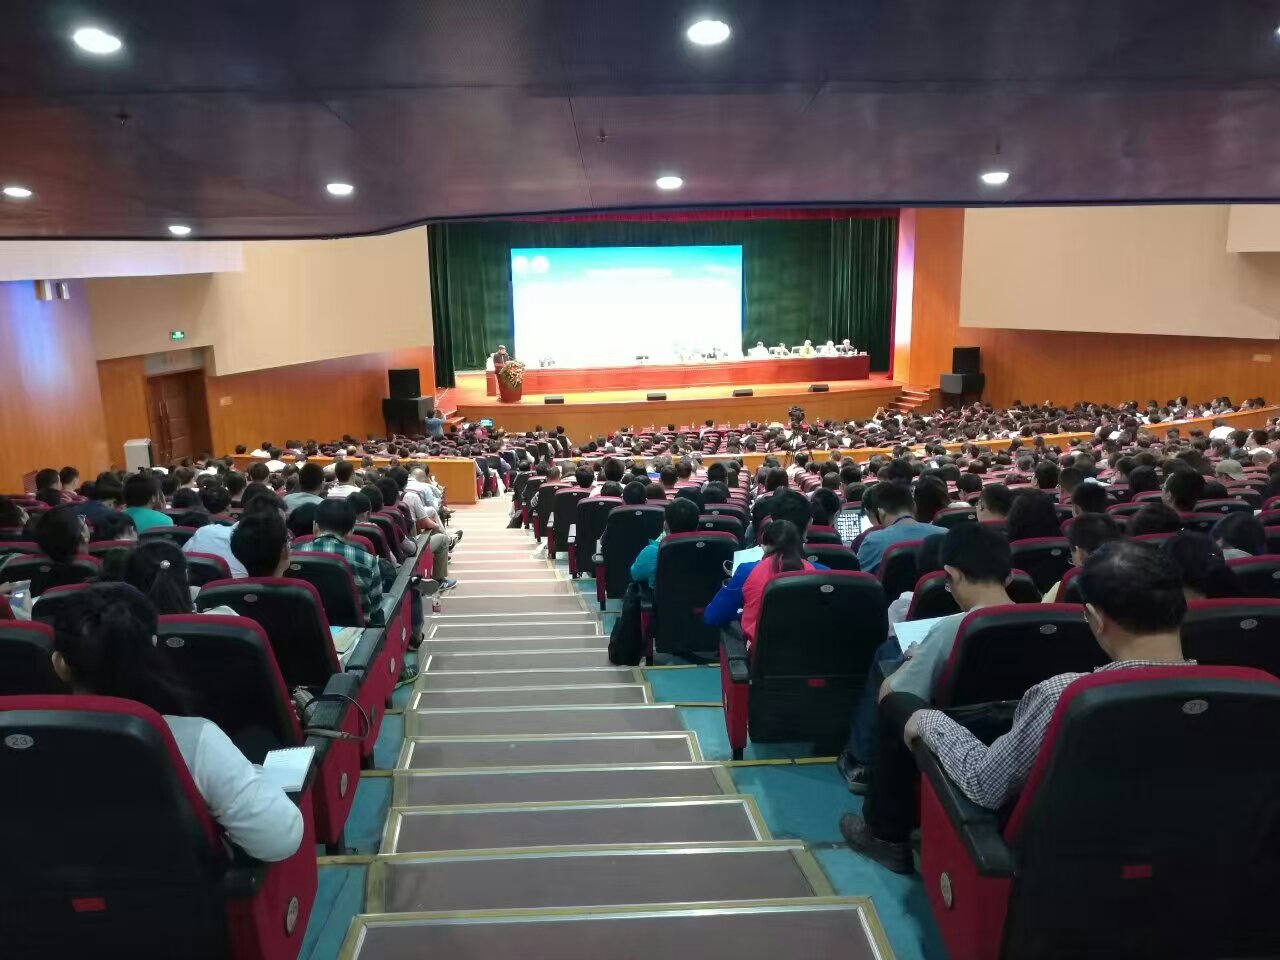  the 15th Annual Meeting of Ecological Society of China